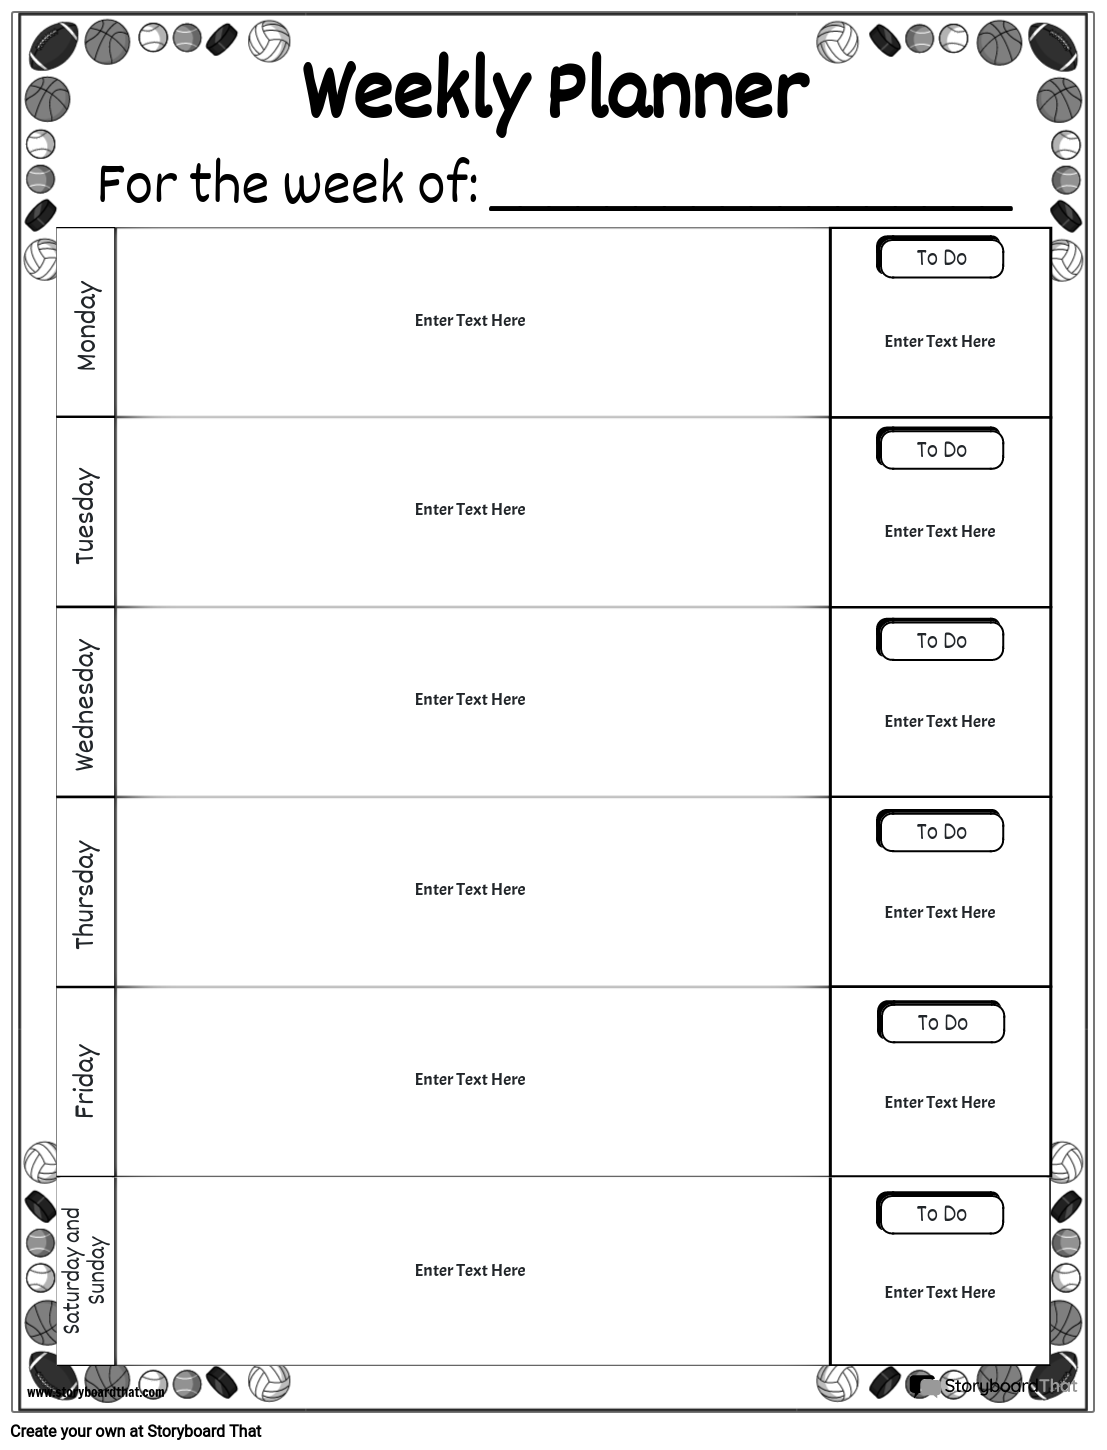 bw-weekly-planner-5-storyboard-by-fi-examples